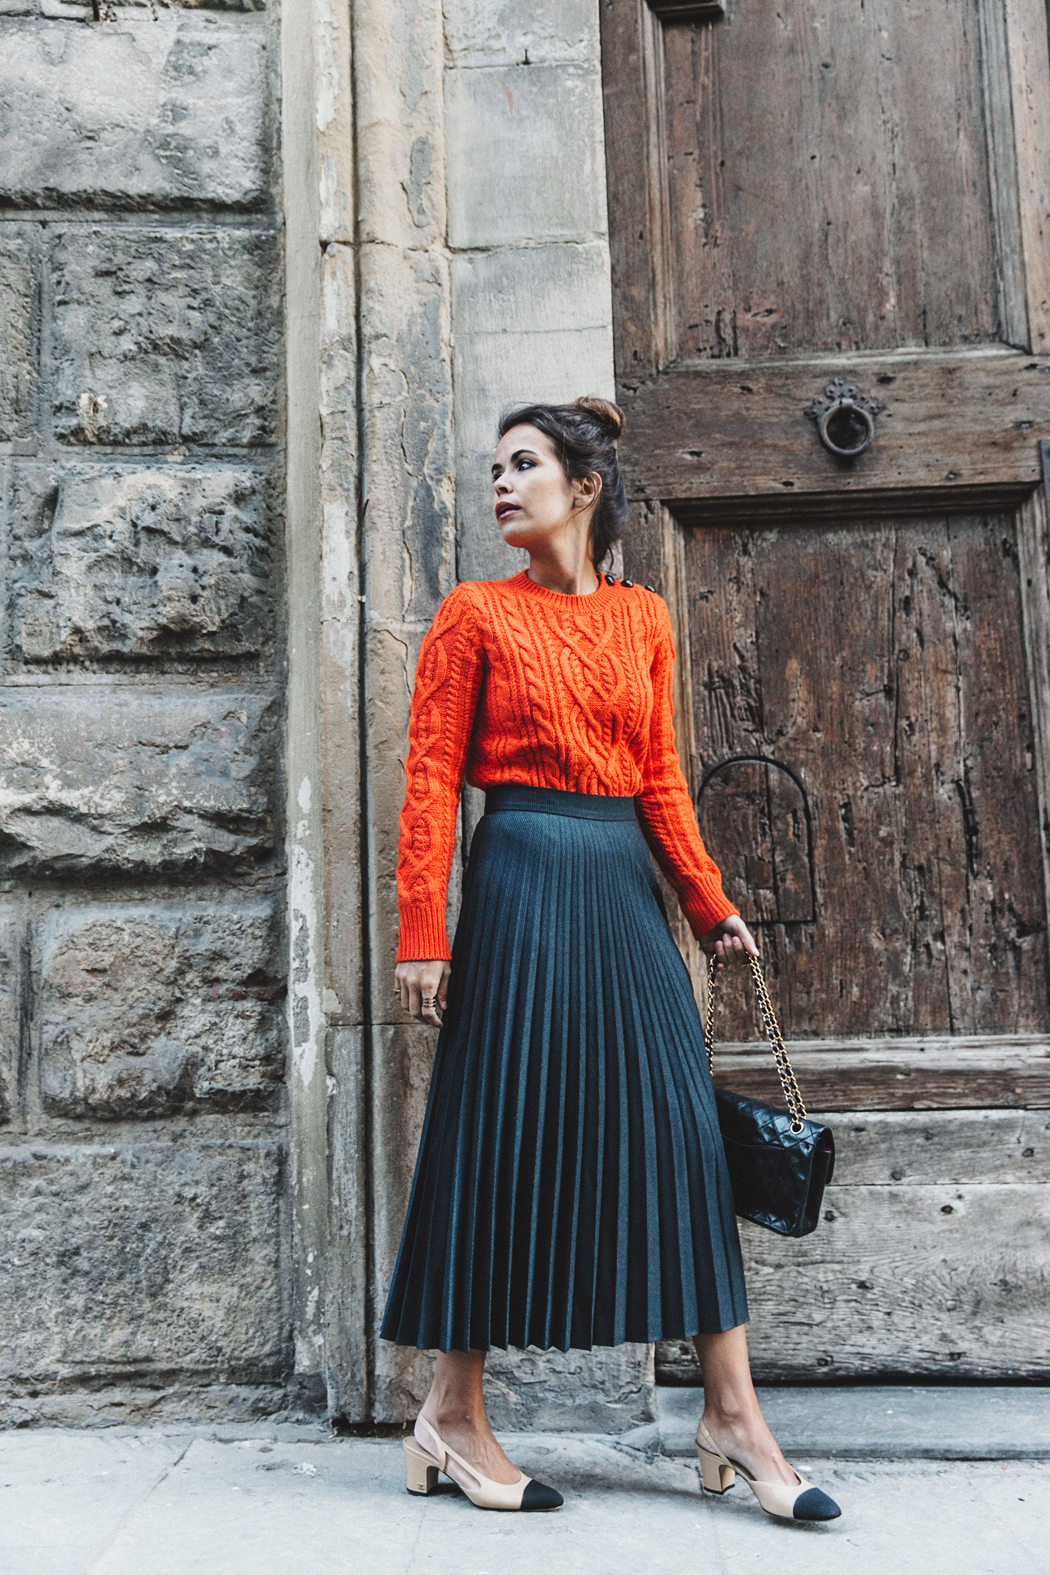 Orange_Sweater-Midi_Skirt-Slingback_Shoes_Chanel-Vintage_Bag-Florence-Outfit-Street_Style-15